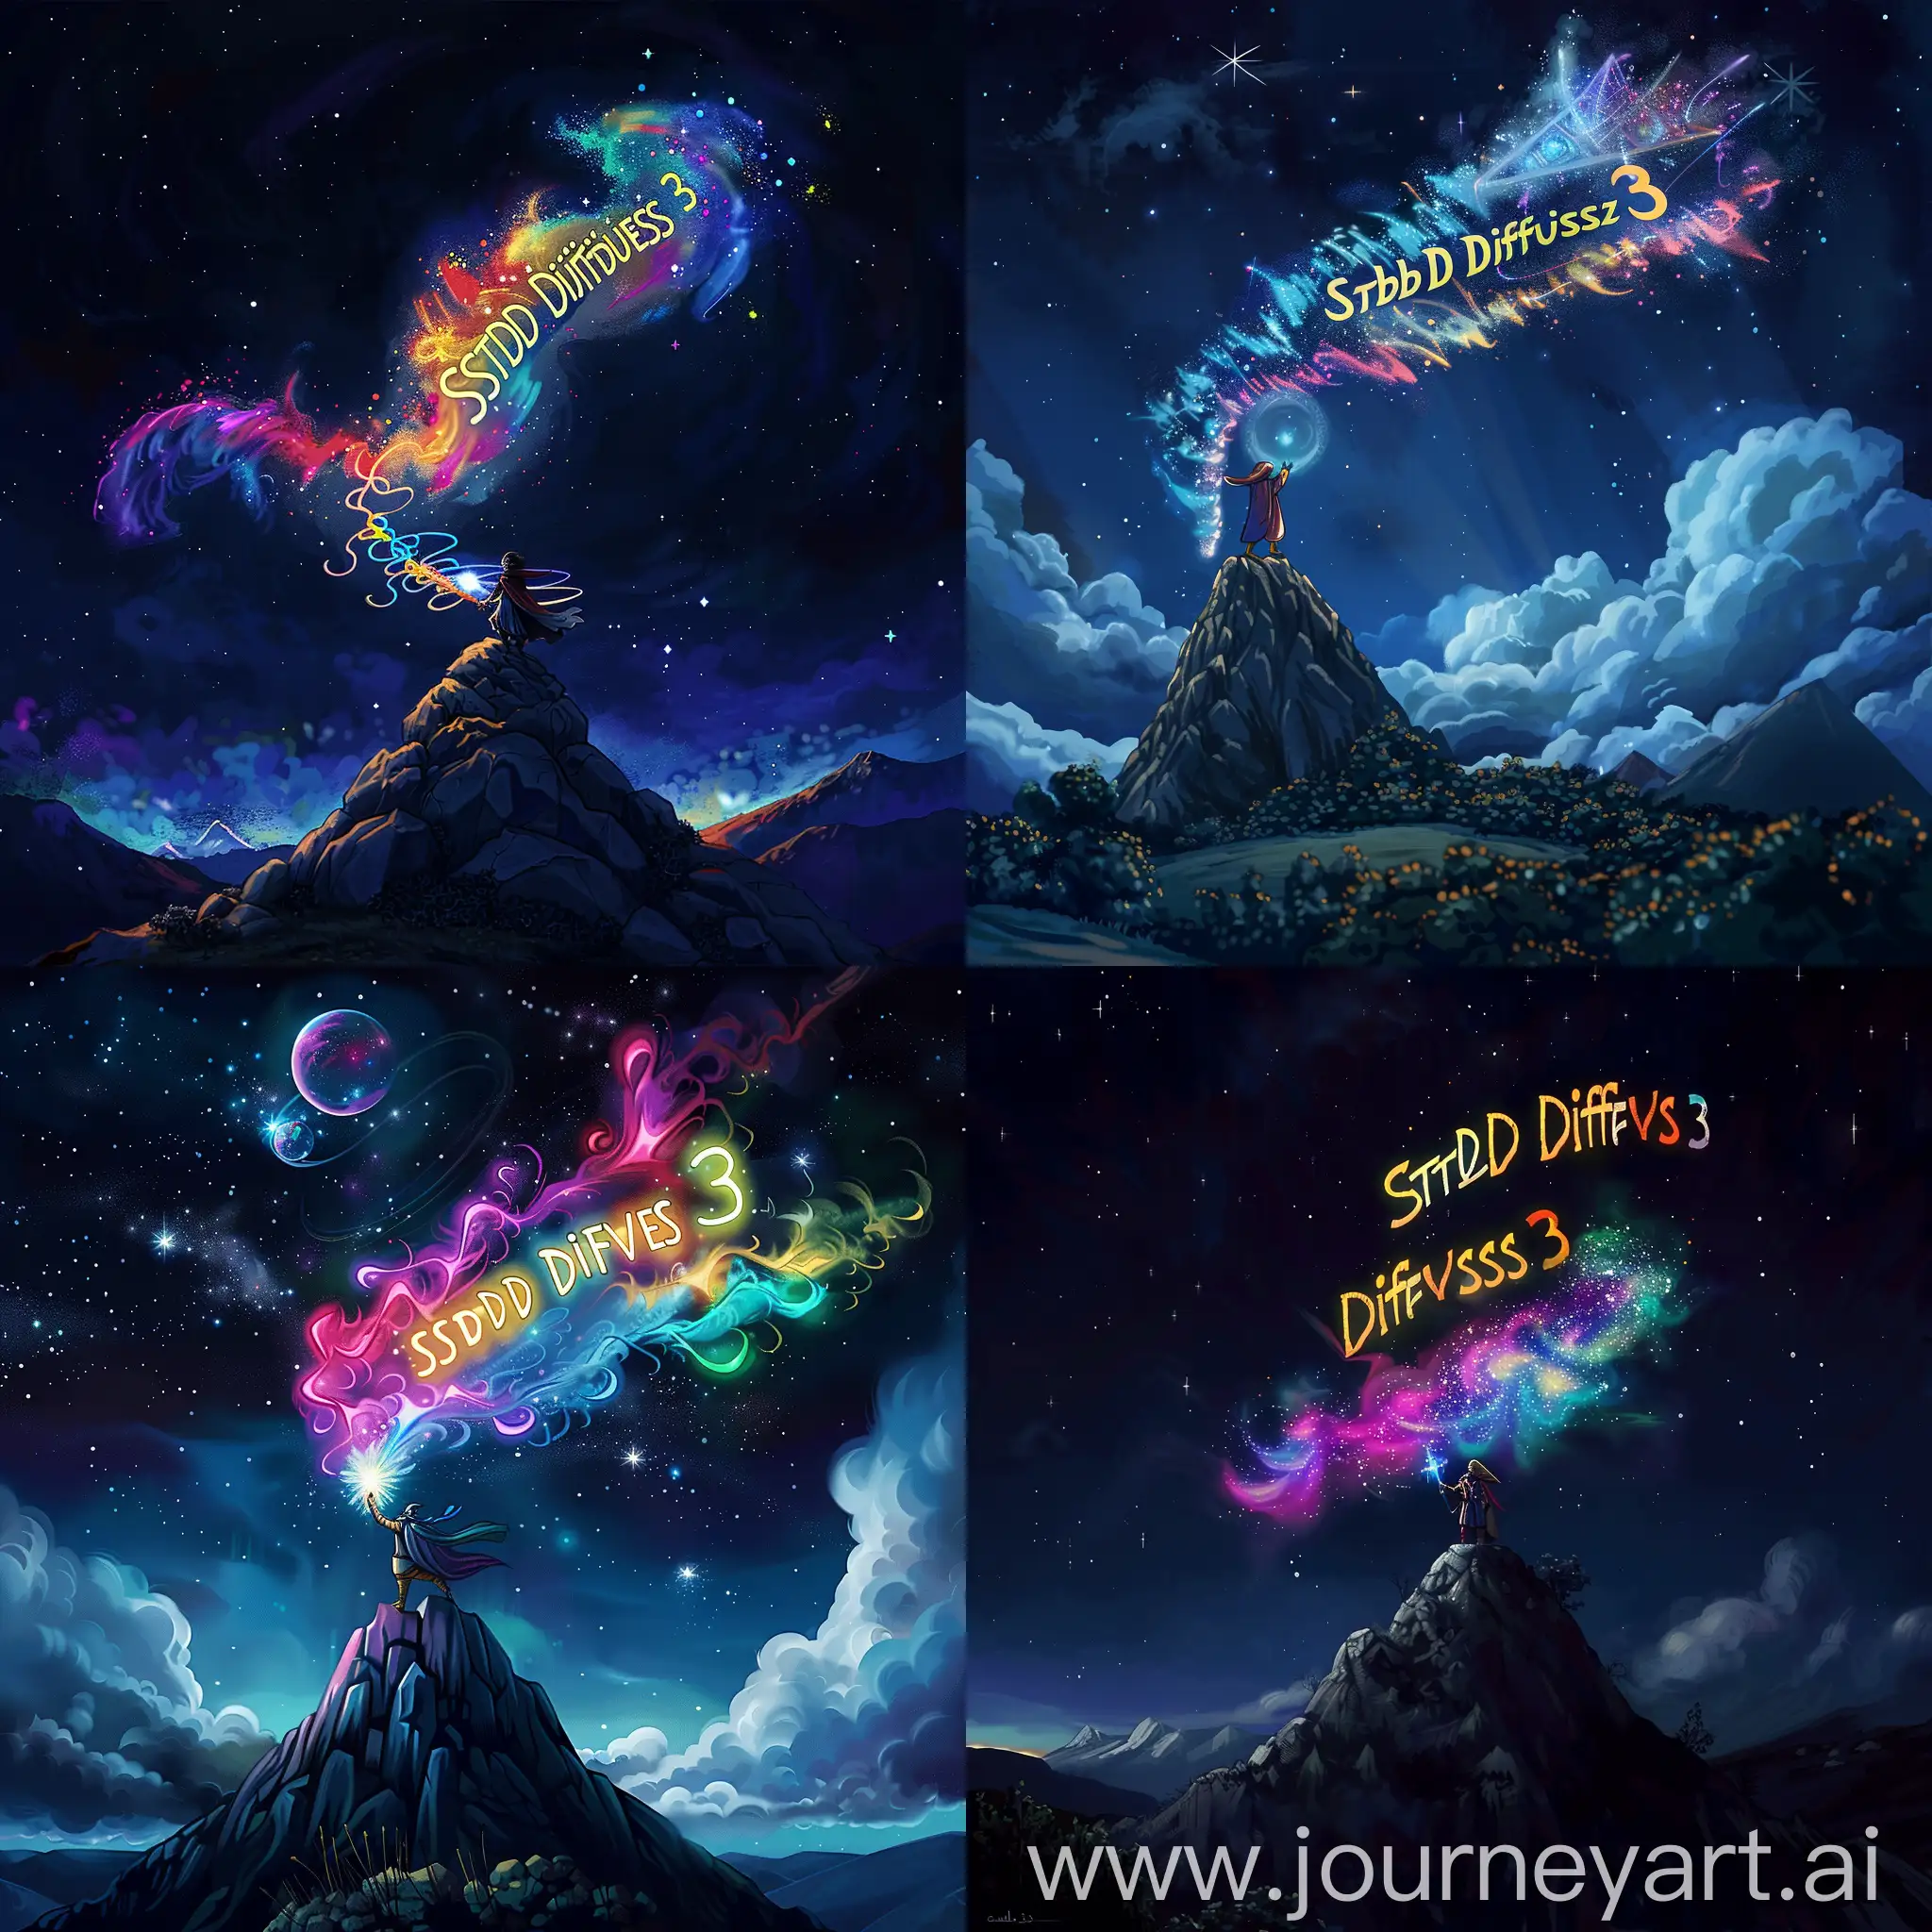 Epic anime artwork of a wizard atop a mountain at night casting a cosmic spell into the dark sky that says "Stable Diffusion 3" made out of colorful energy